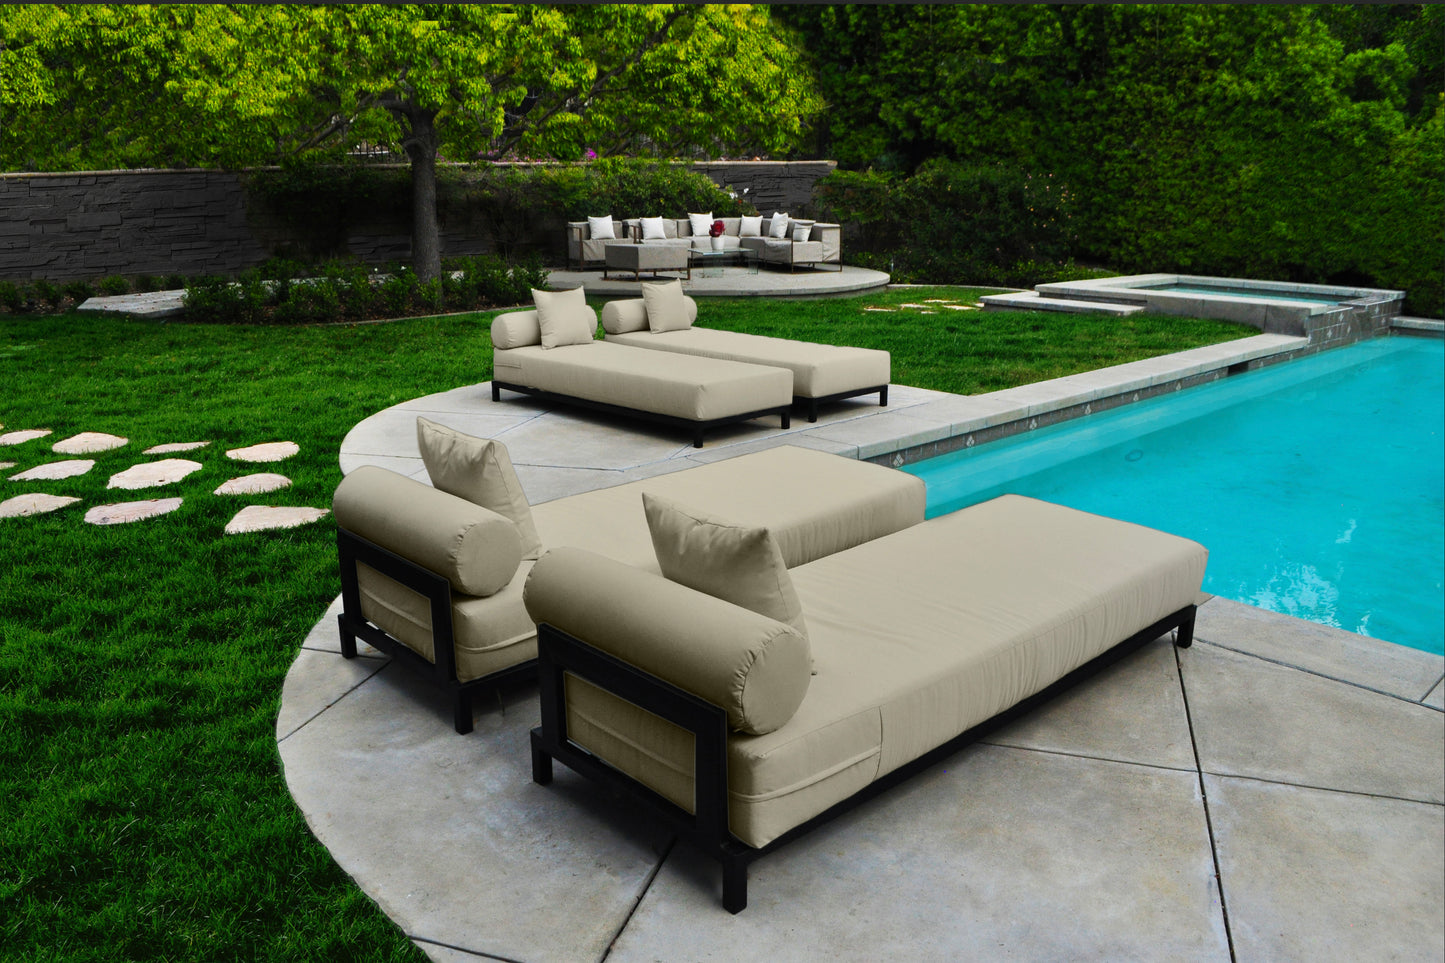 Volantes Outdoor Beige Chaise Loungers (Set of 2)